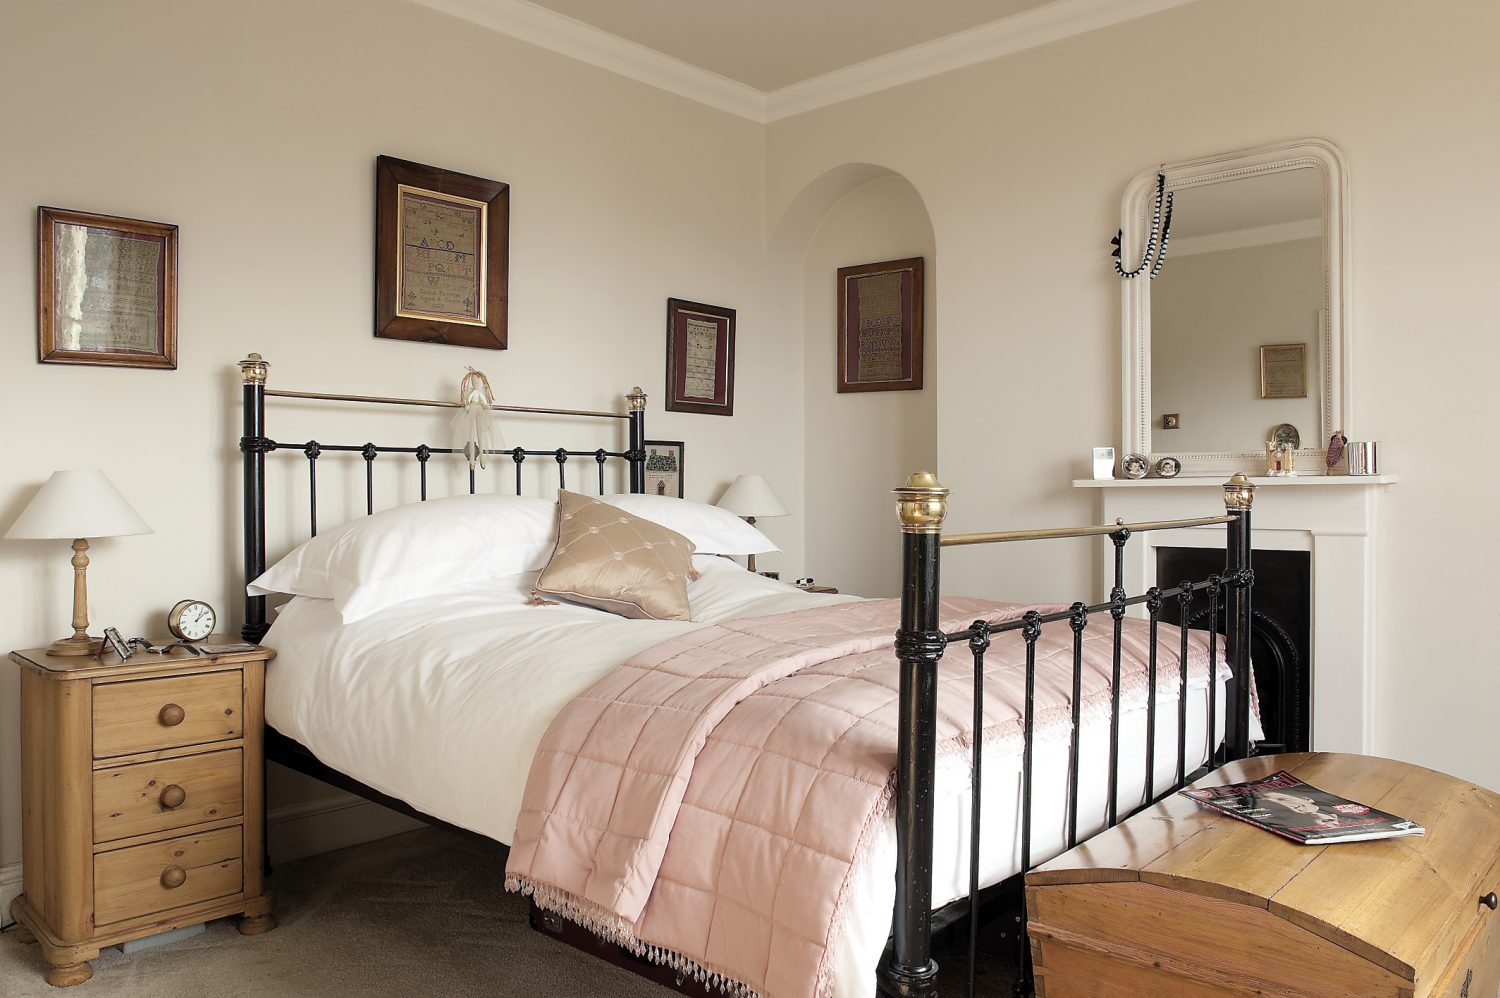 An iron bedstead holds centre stage in the master bedroom. Either side of the chimney breast and above the bed there are framed antique samplers. “When I first started work, it was in an auction house and one of the guys there used to collect old samplers. I bought one and just caught the bug,” says Brad